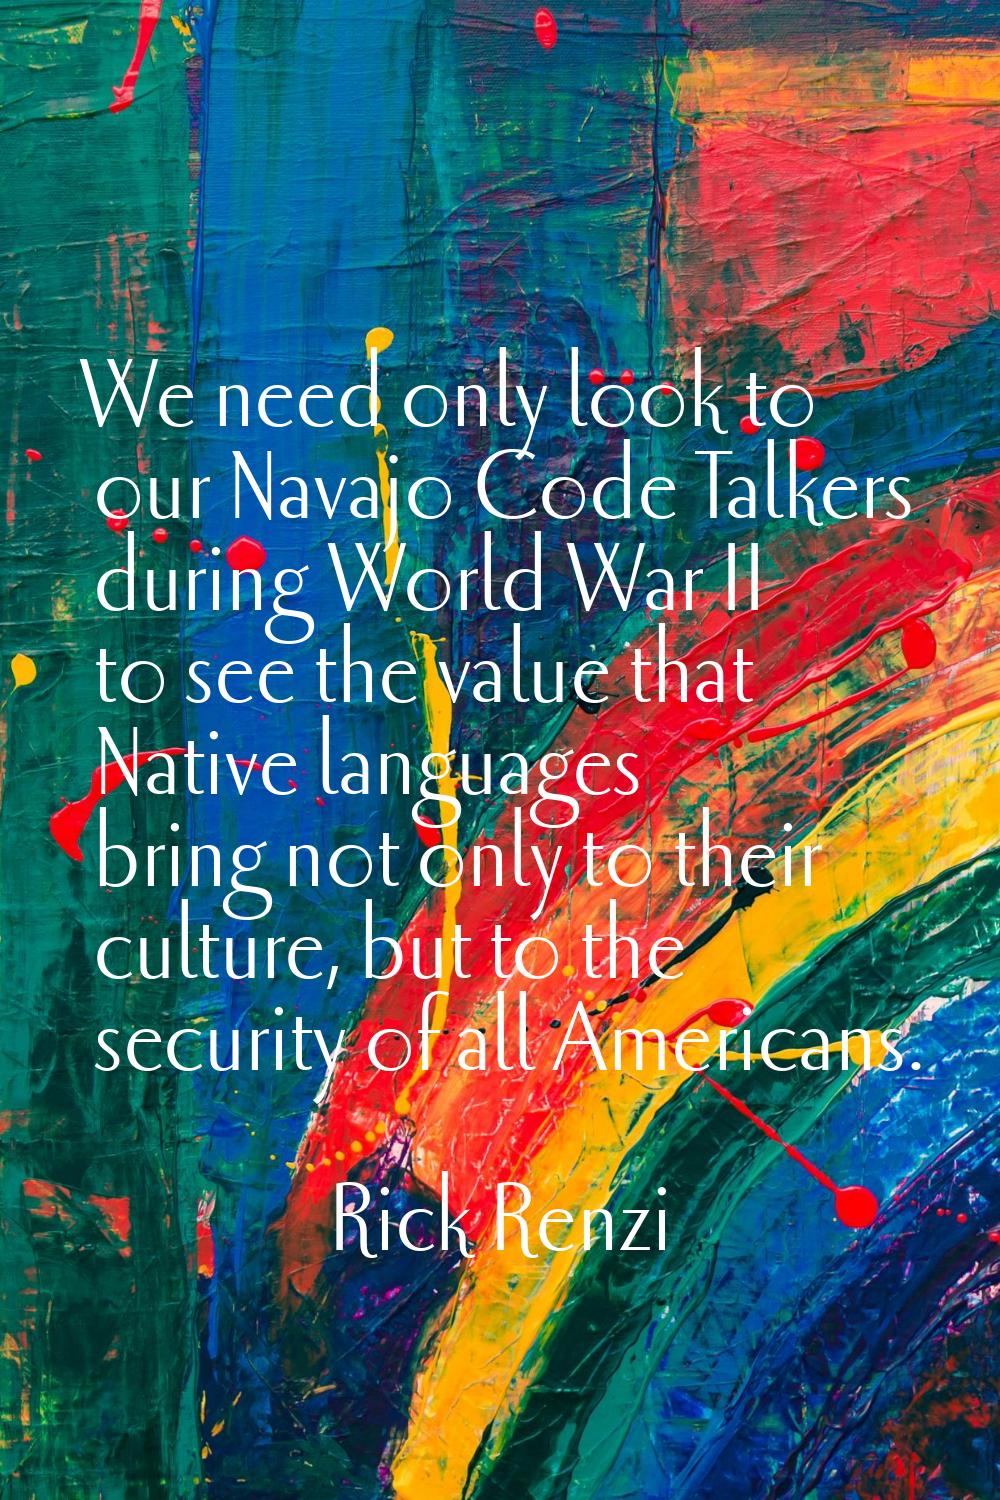 We need only look to our Navajo Code Talkers during World War II to see the value that Native langu